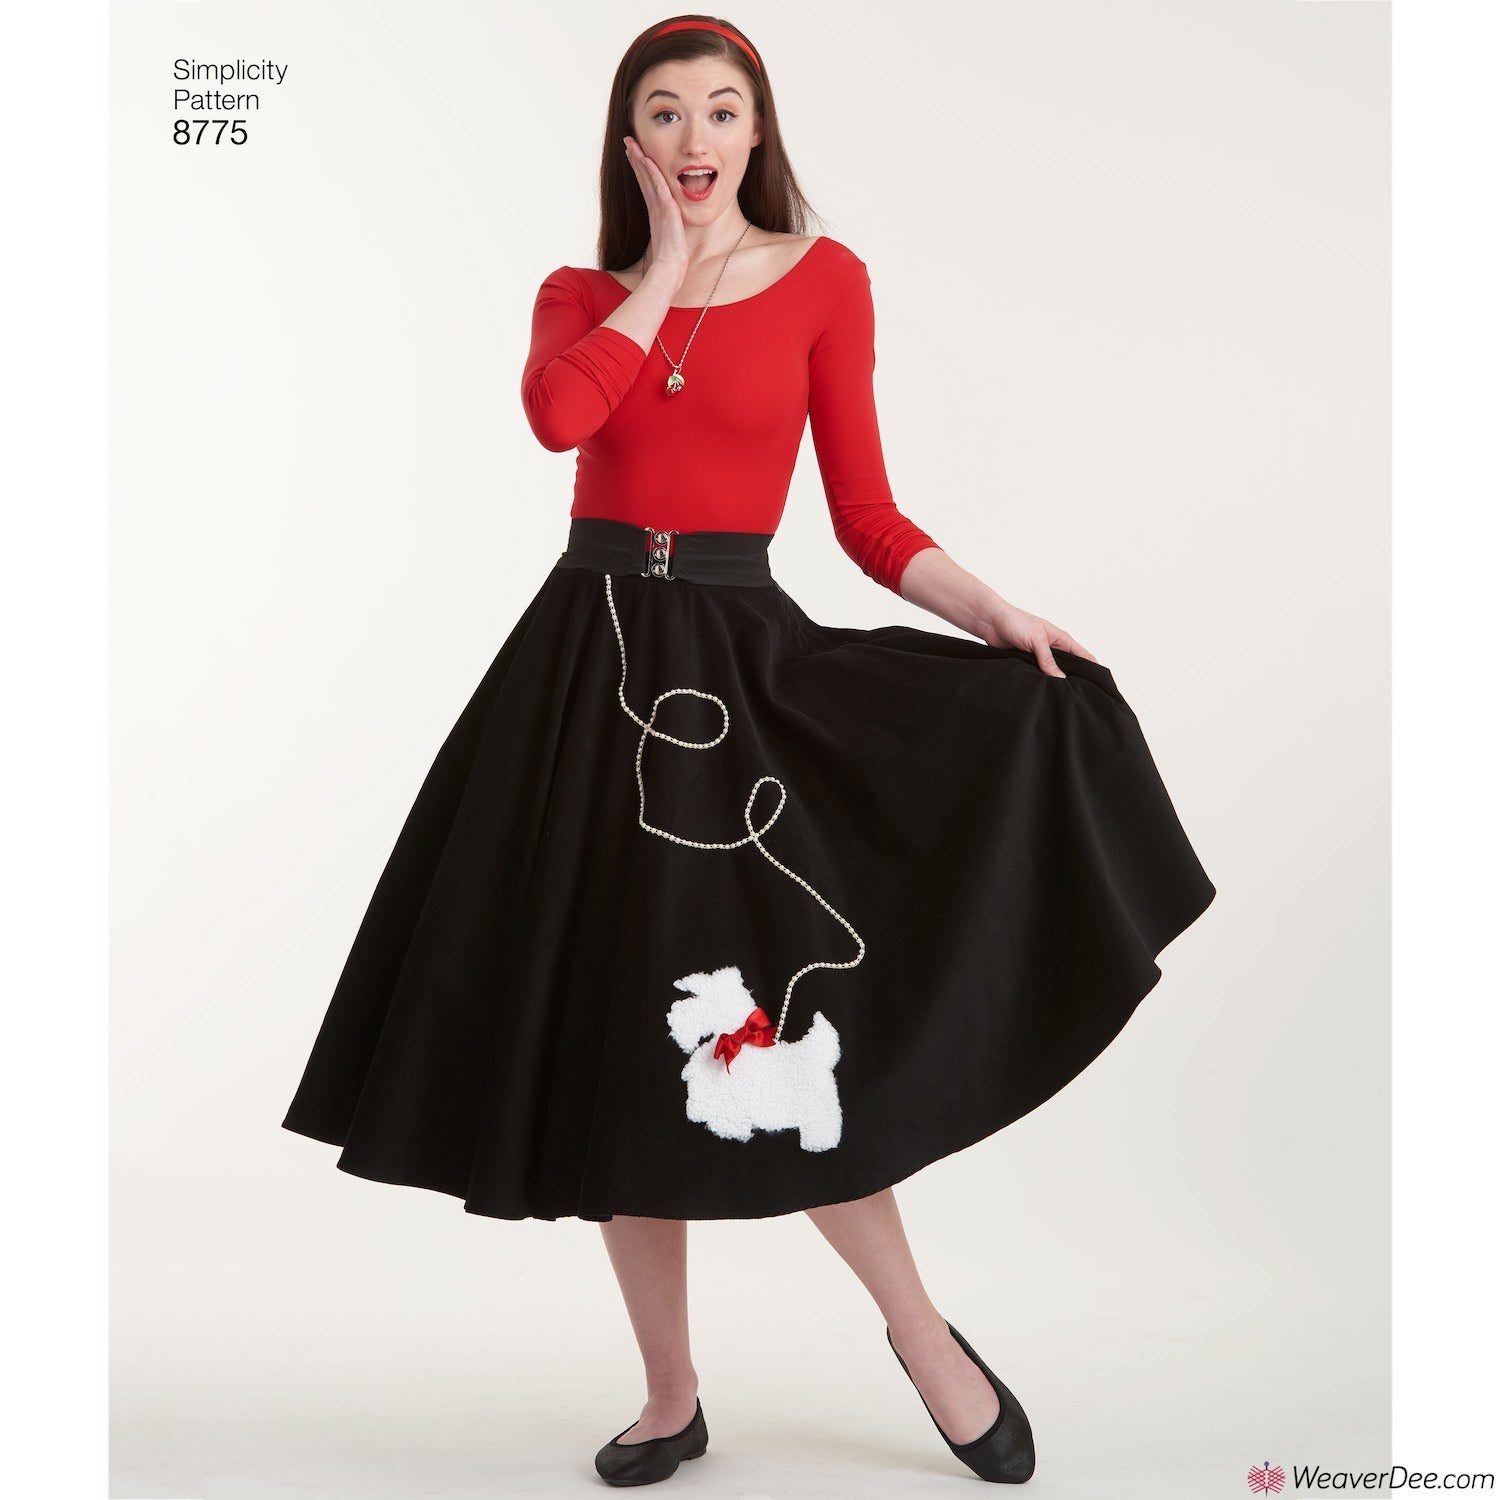 How to Make a Poodle Skirt Without a Pattern and With Minimal Sewing